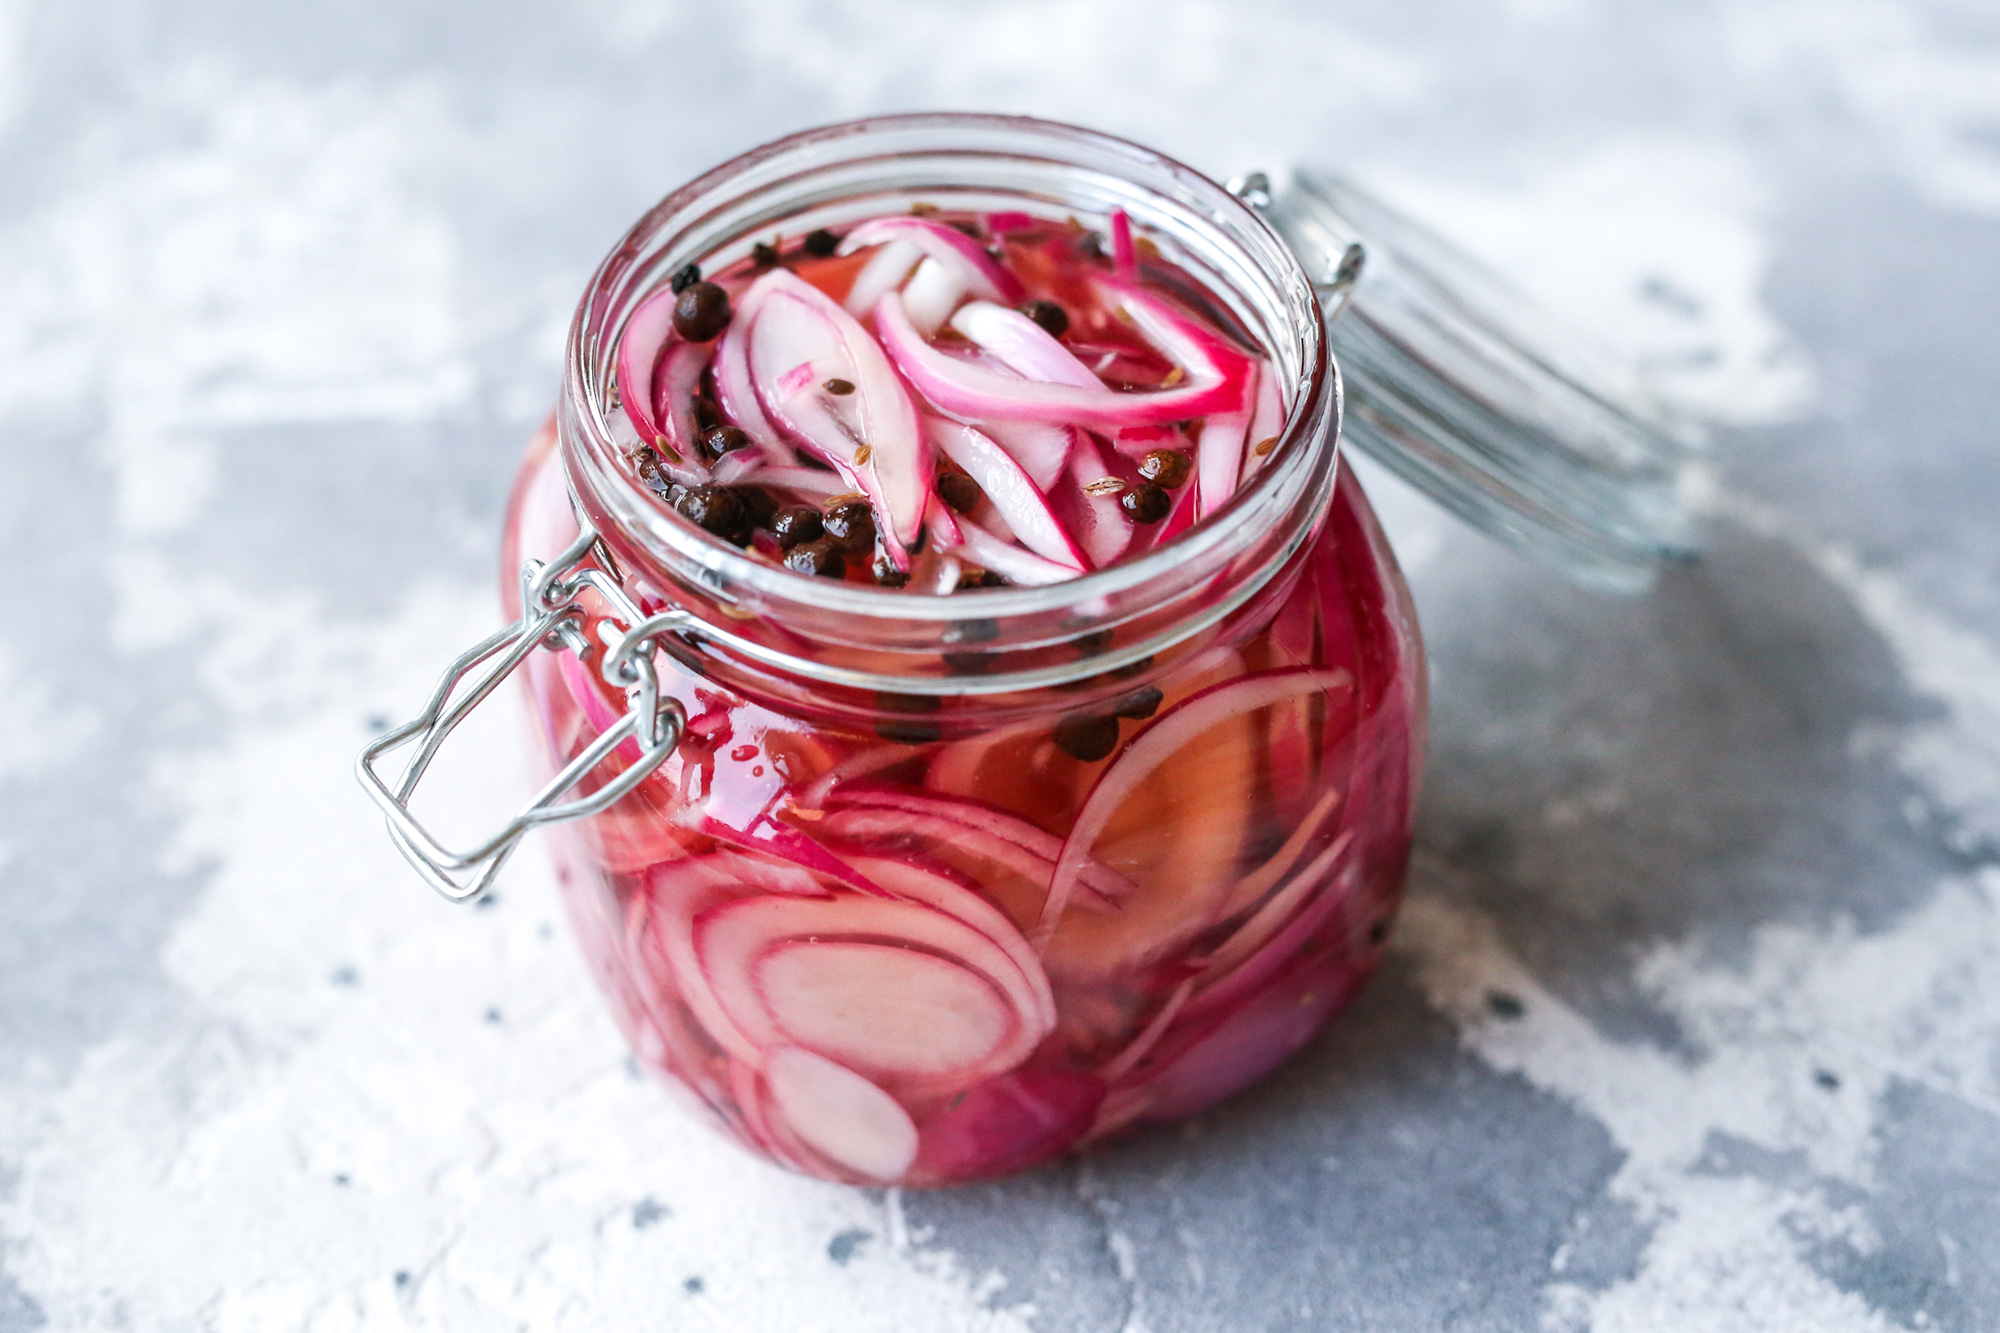 Pickled Onions by Arthur